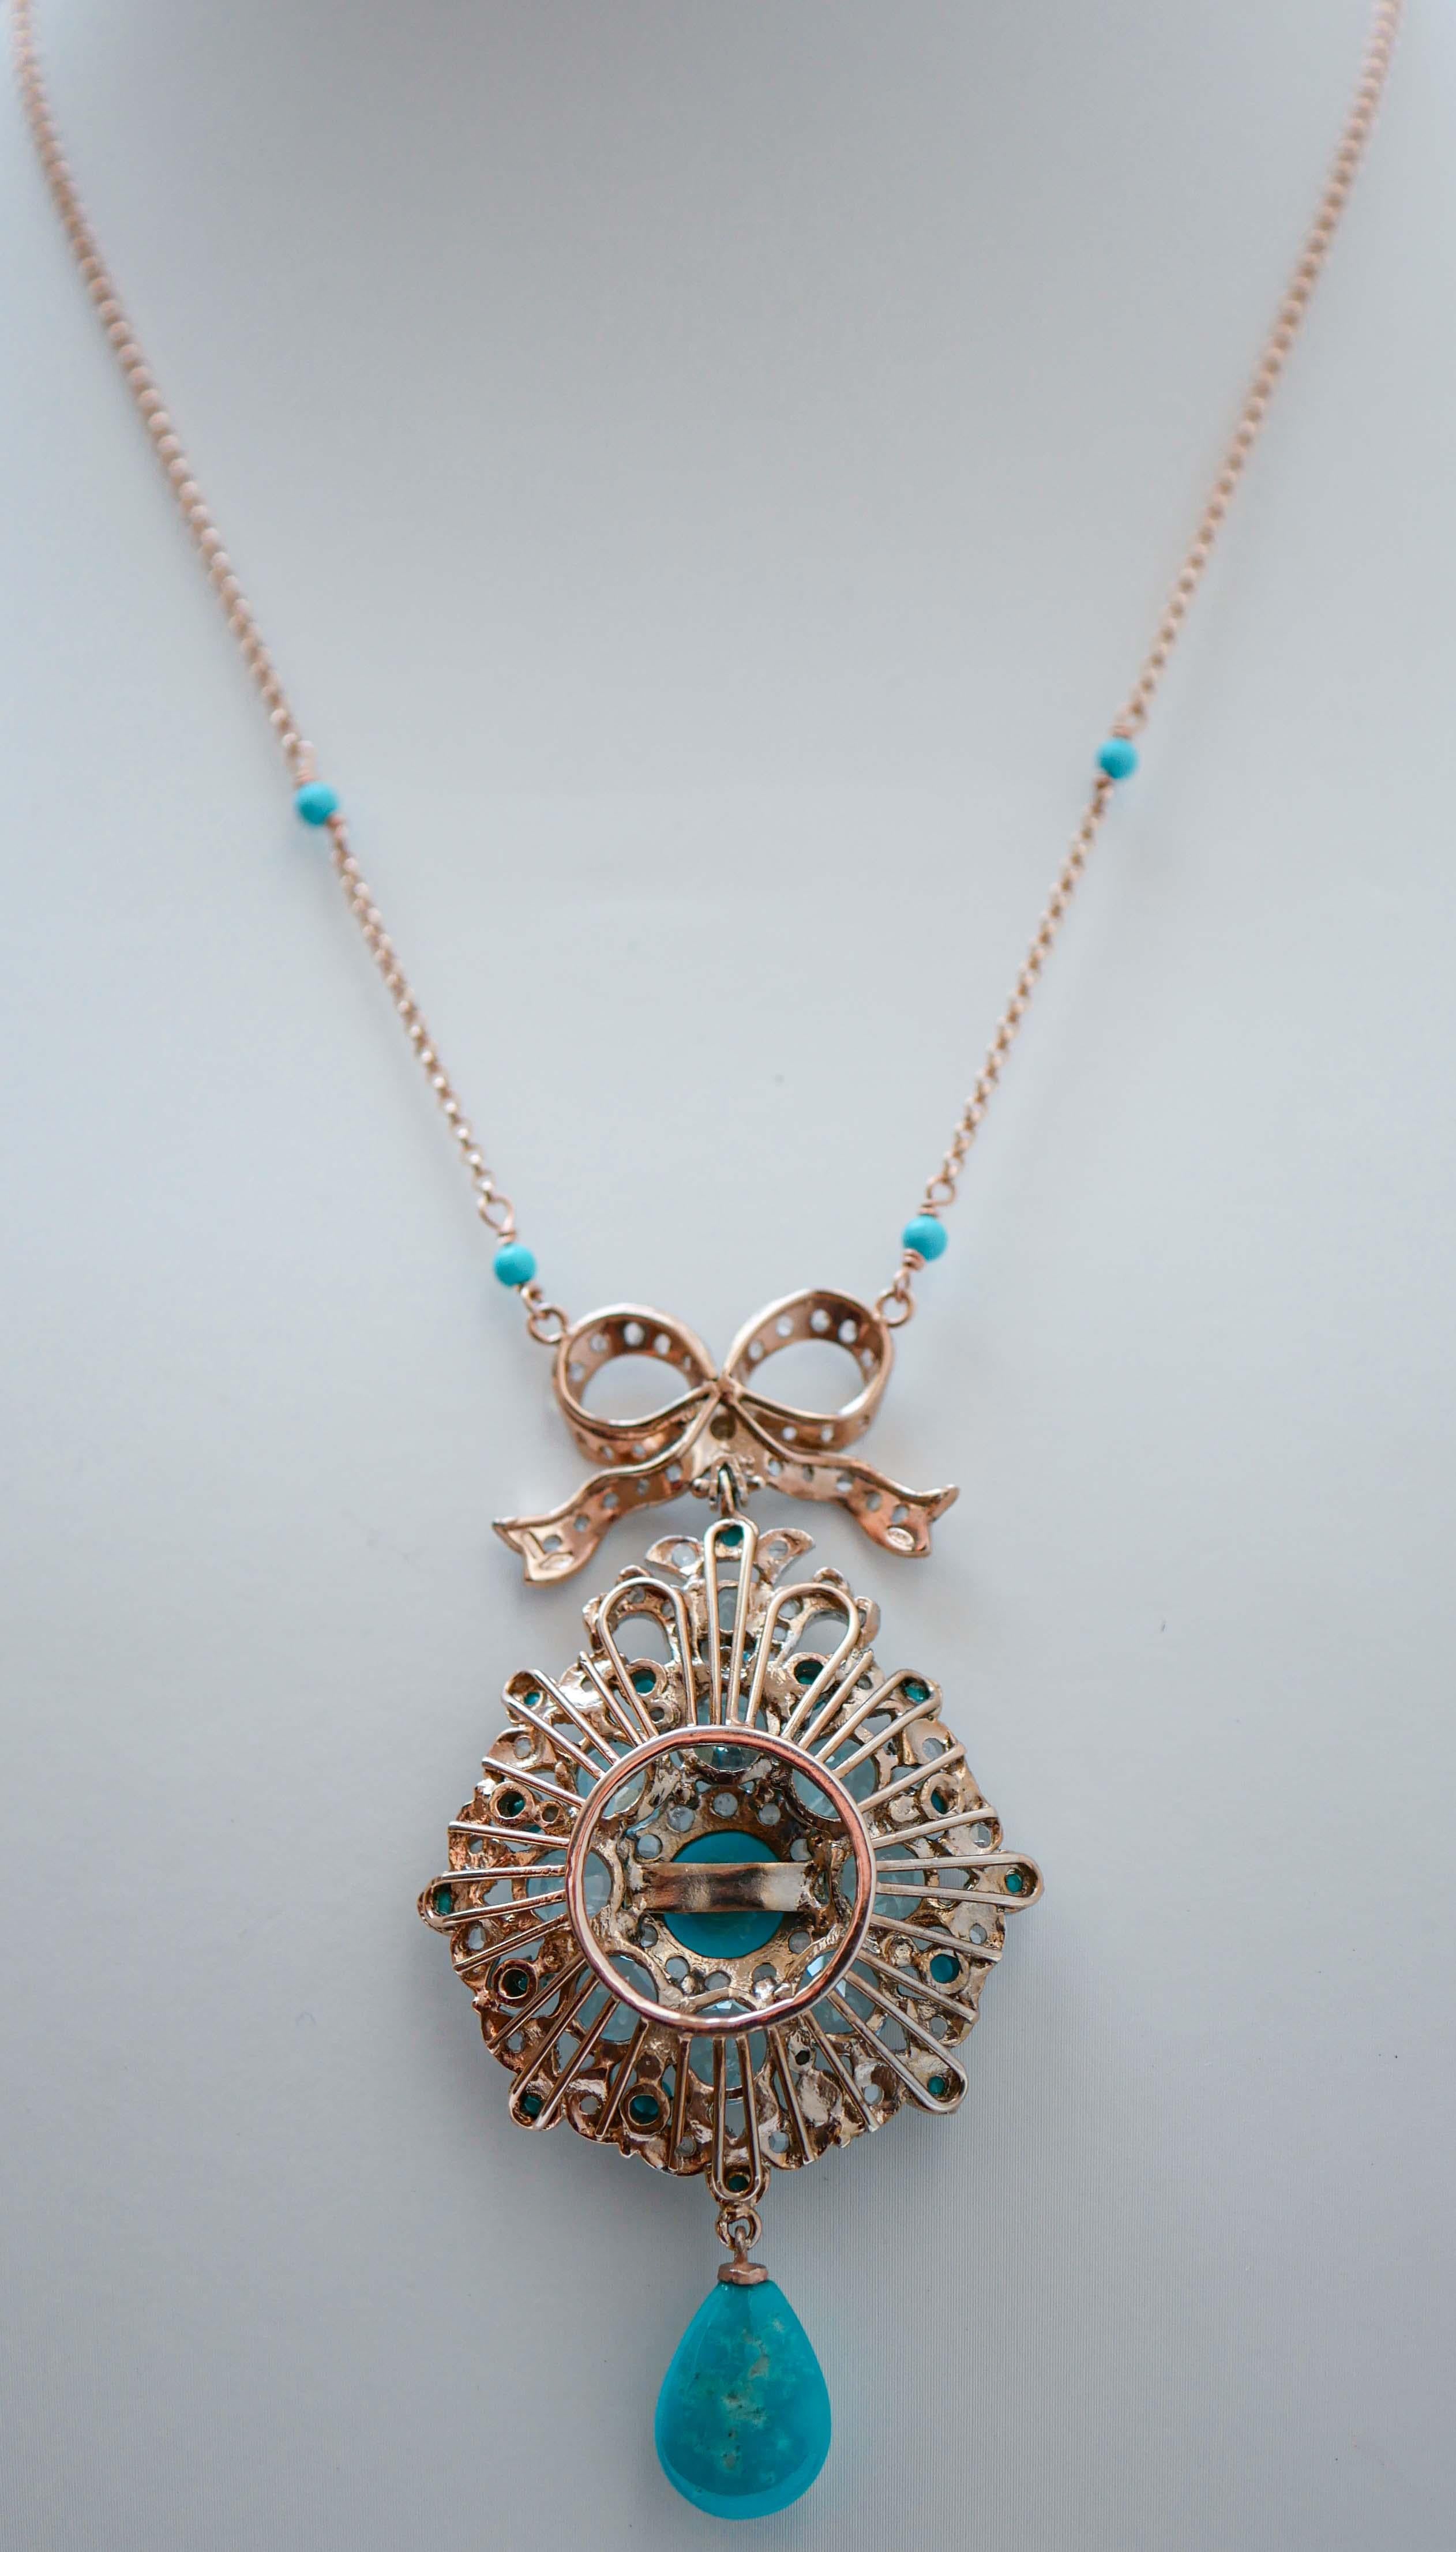 Mixed Cut Aquamarine Colour Topazs, Turquoise, Diamonds, Gold and Silver Pendant Necklace. For Sale